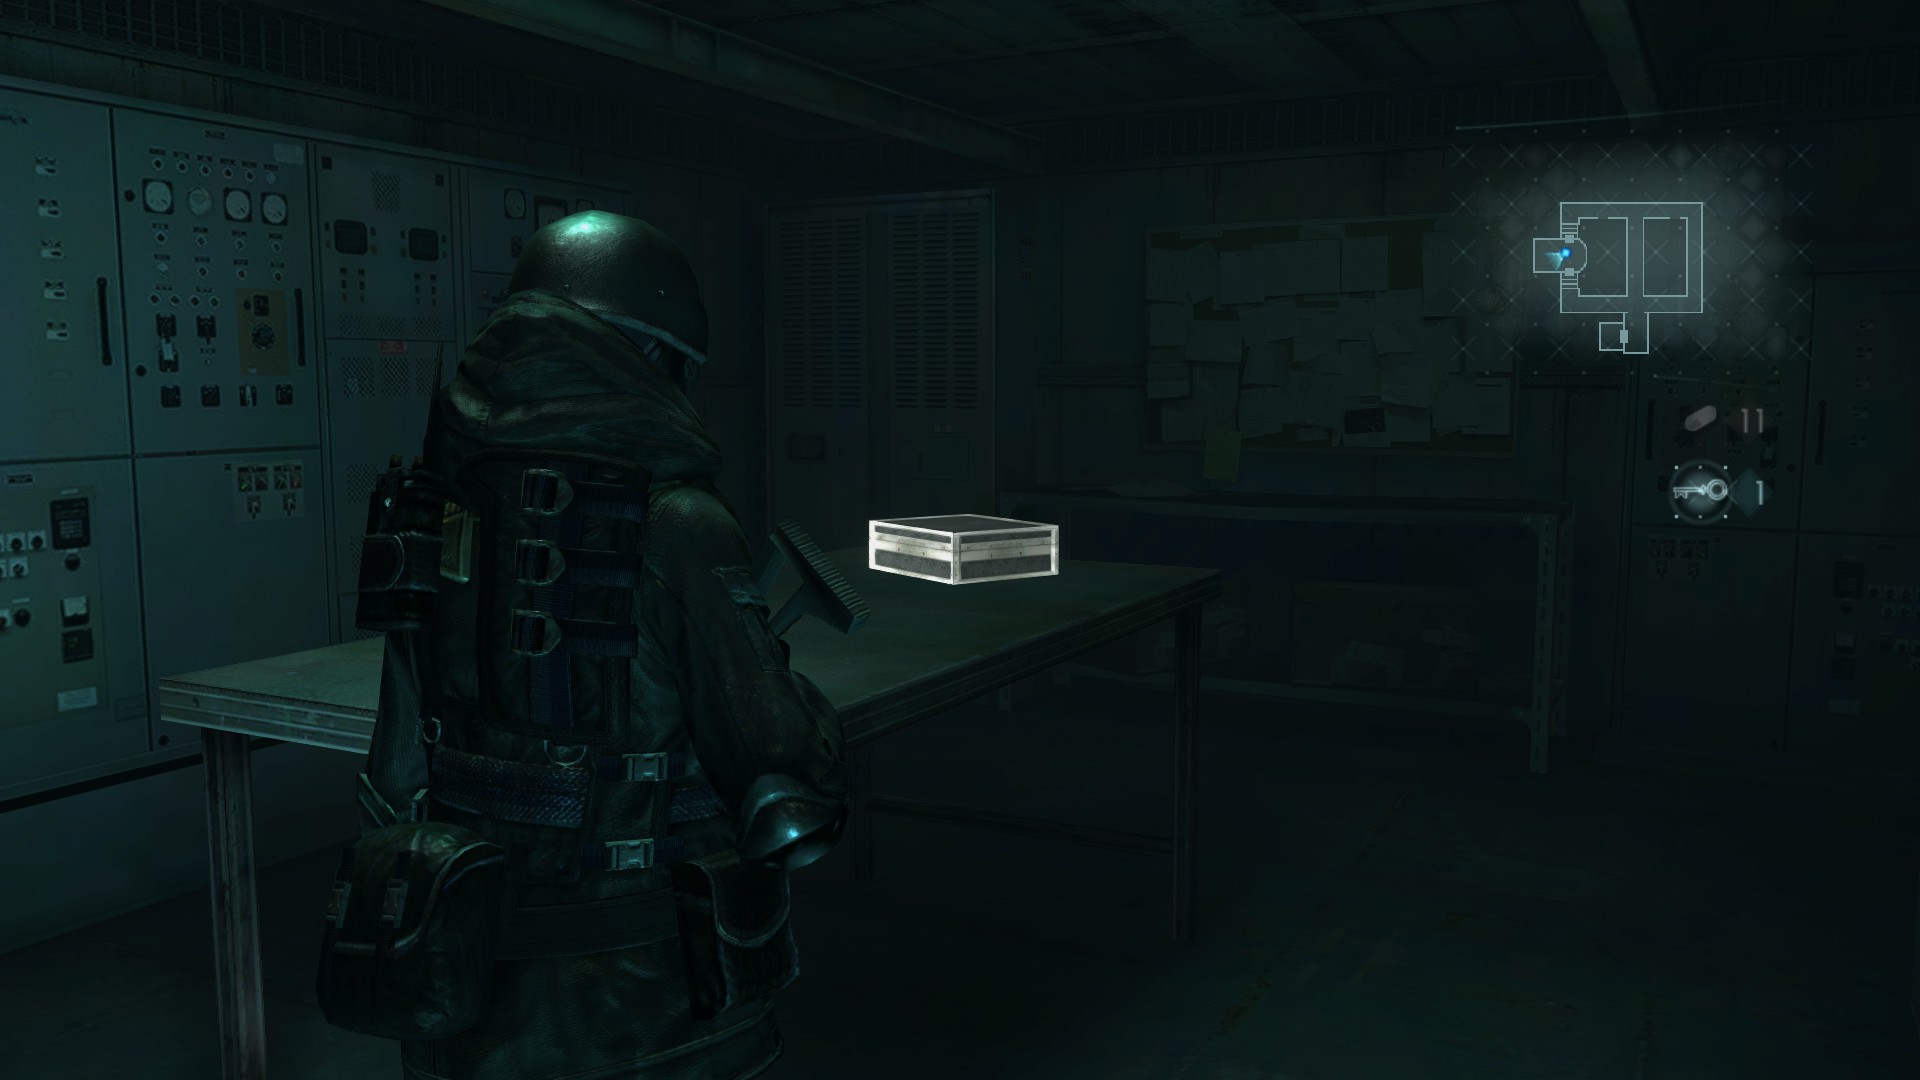 Resident Evil Revelations - All Weapon Case Locations in Ghost Ship Chaos